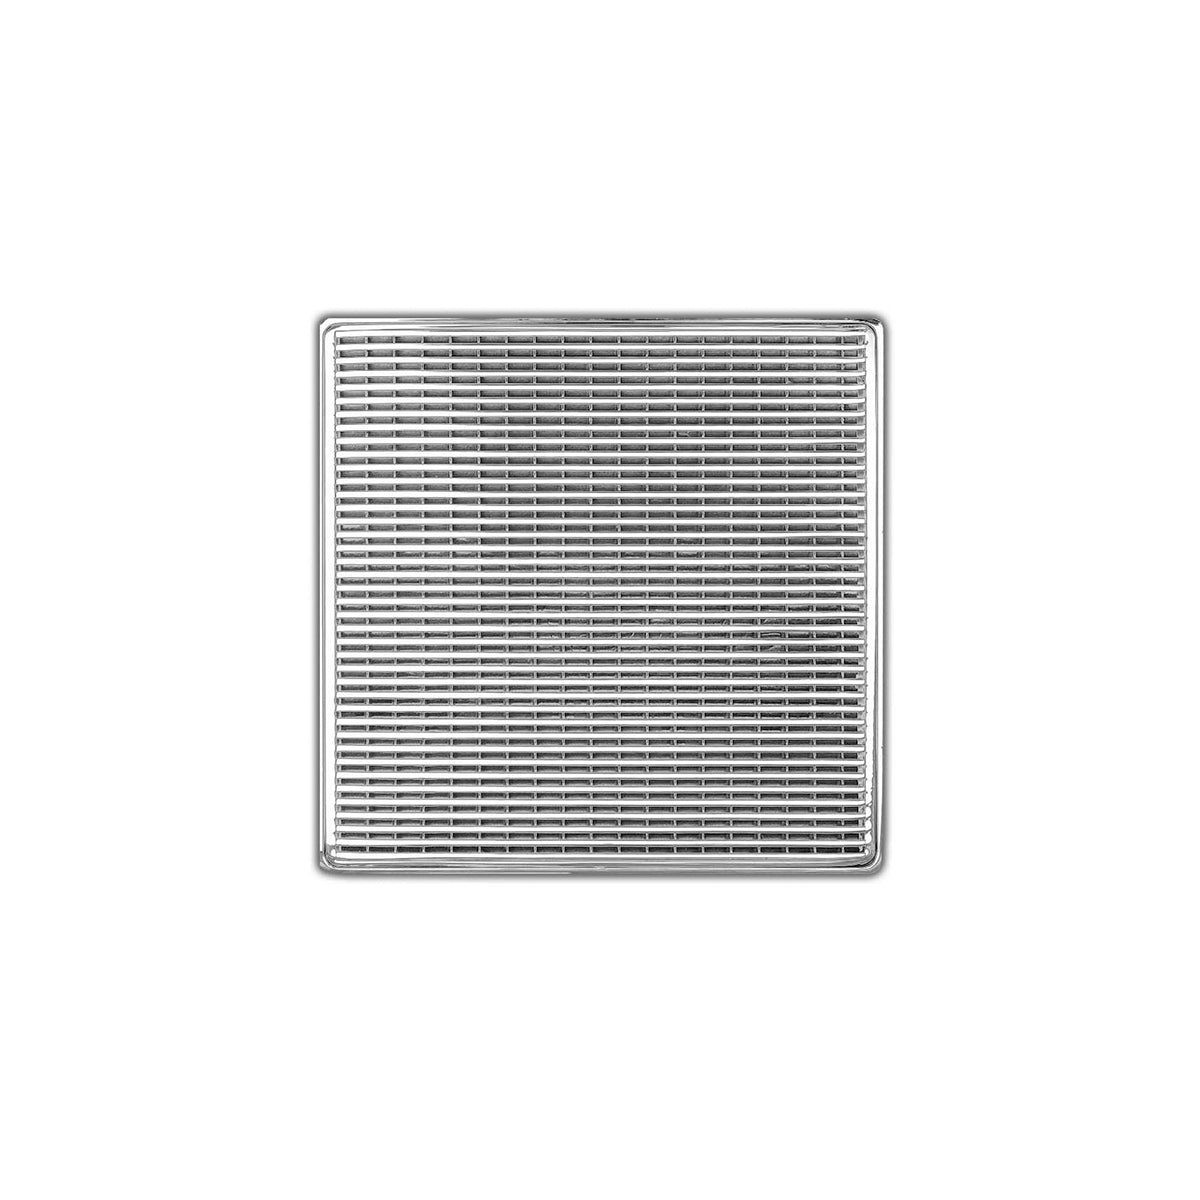 Infinity Drain 5" x 5" WD 5 High Flow Premium Center Drain Kit with Wedge Wire Pattern Decorative Plate with ABS Drain Body, 3" Outlet